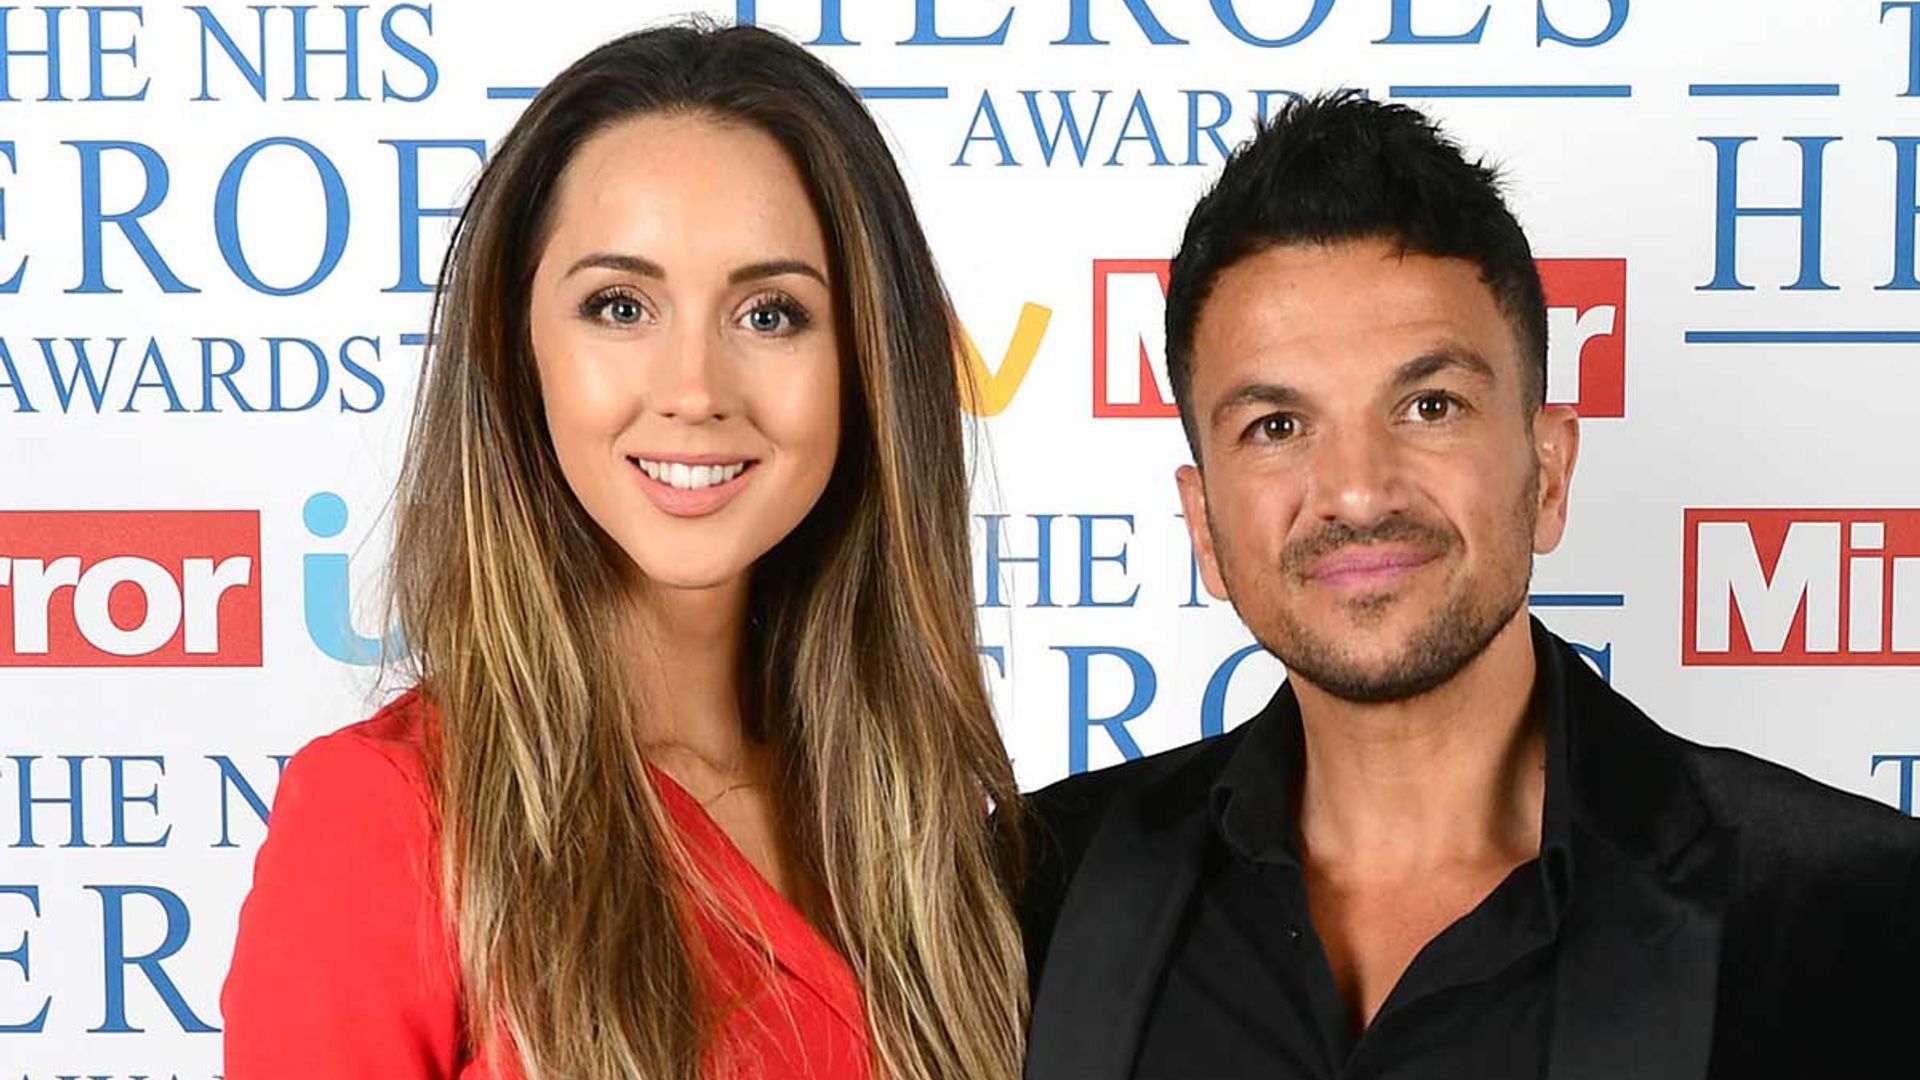 Peter Andre shares rare video of wife Emily and daughter Amelia during lockdown